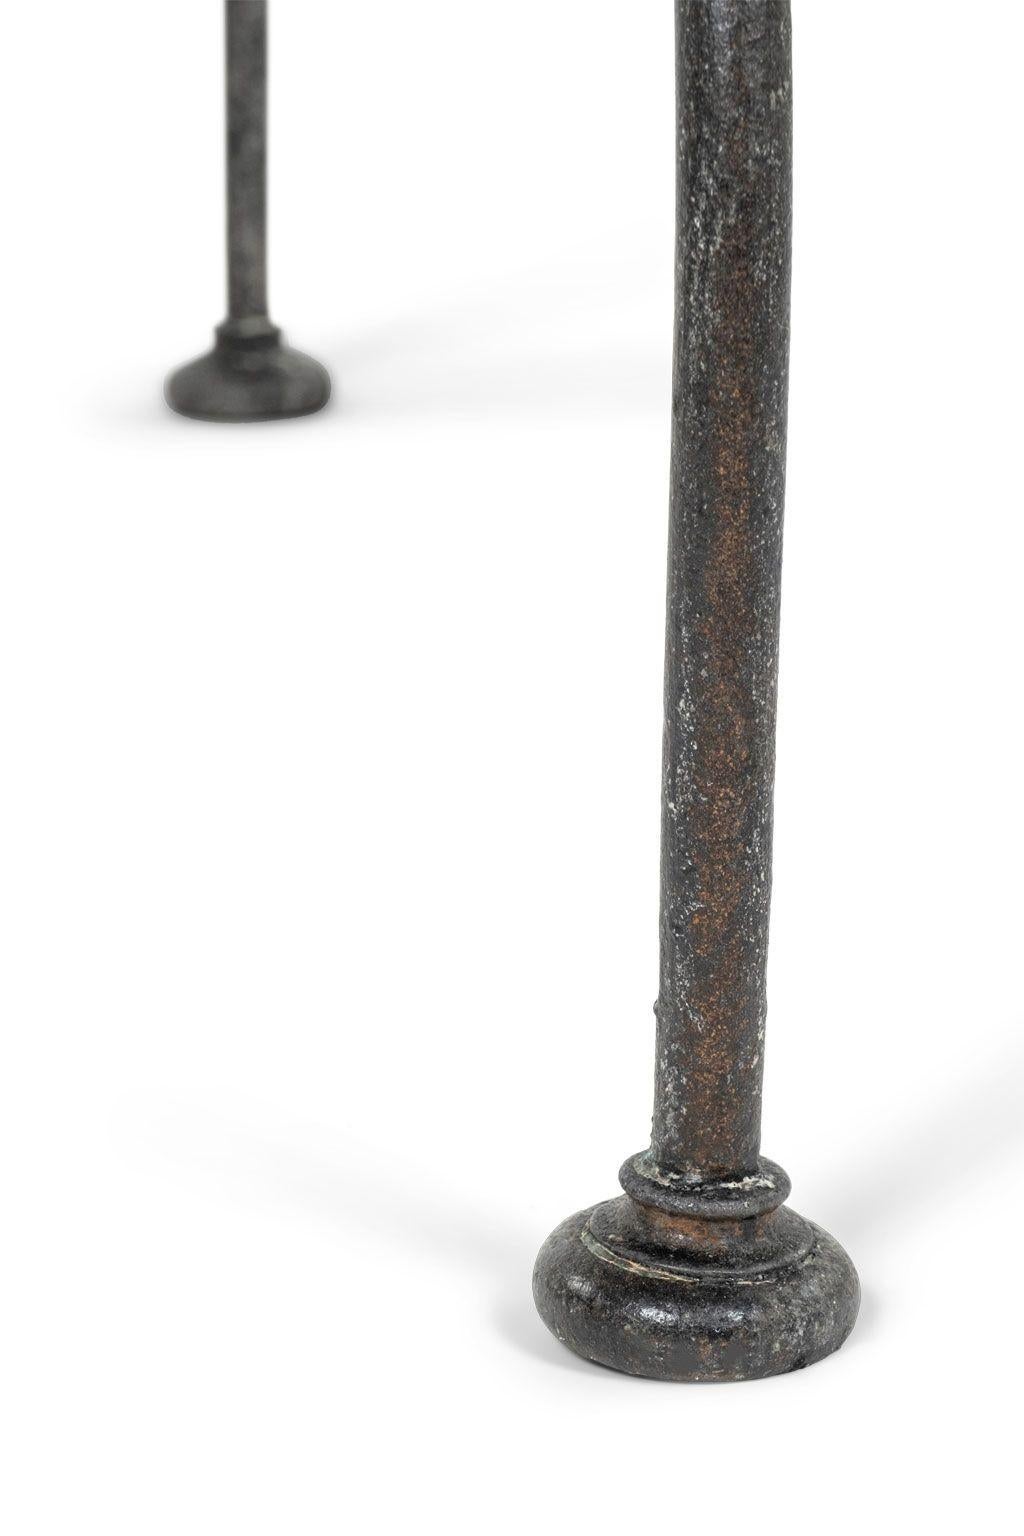 Round bluestone top iron-base center table from France. Three-legged iron table forged circa 1880-1899 with later bluestone top.